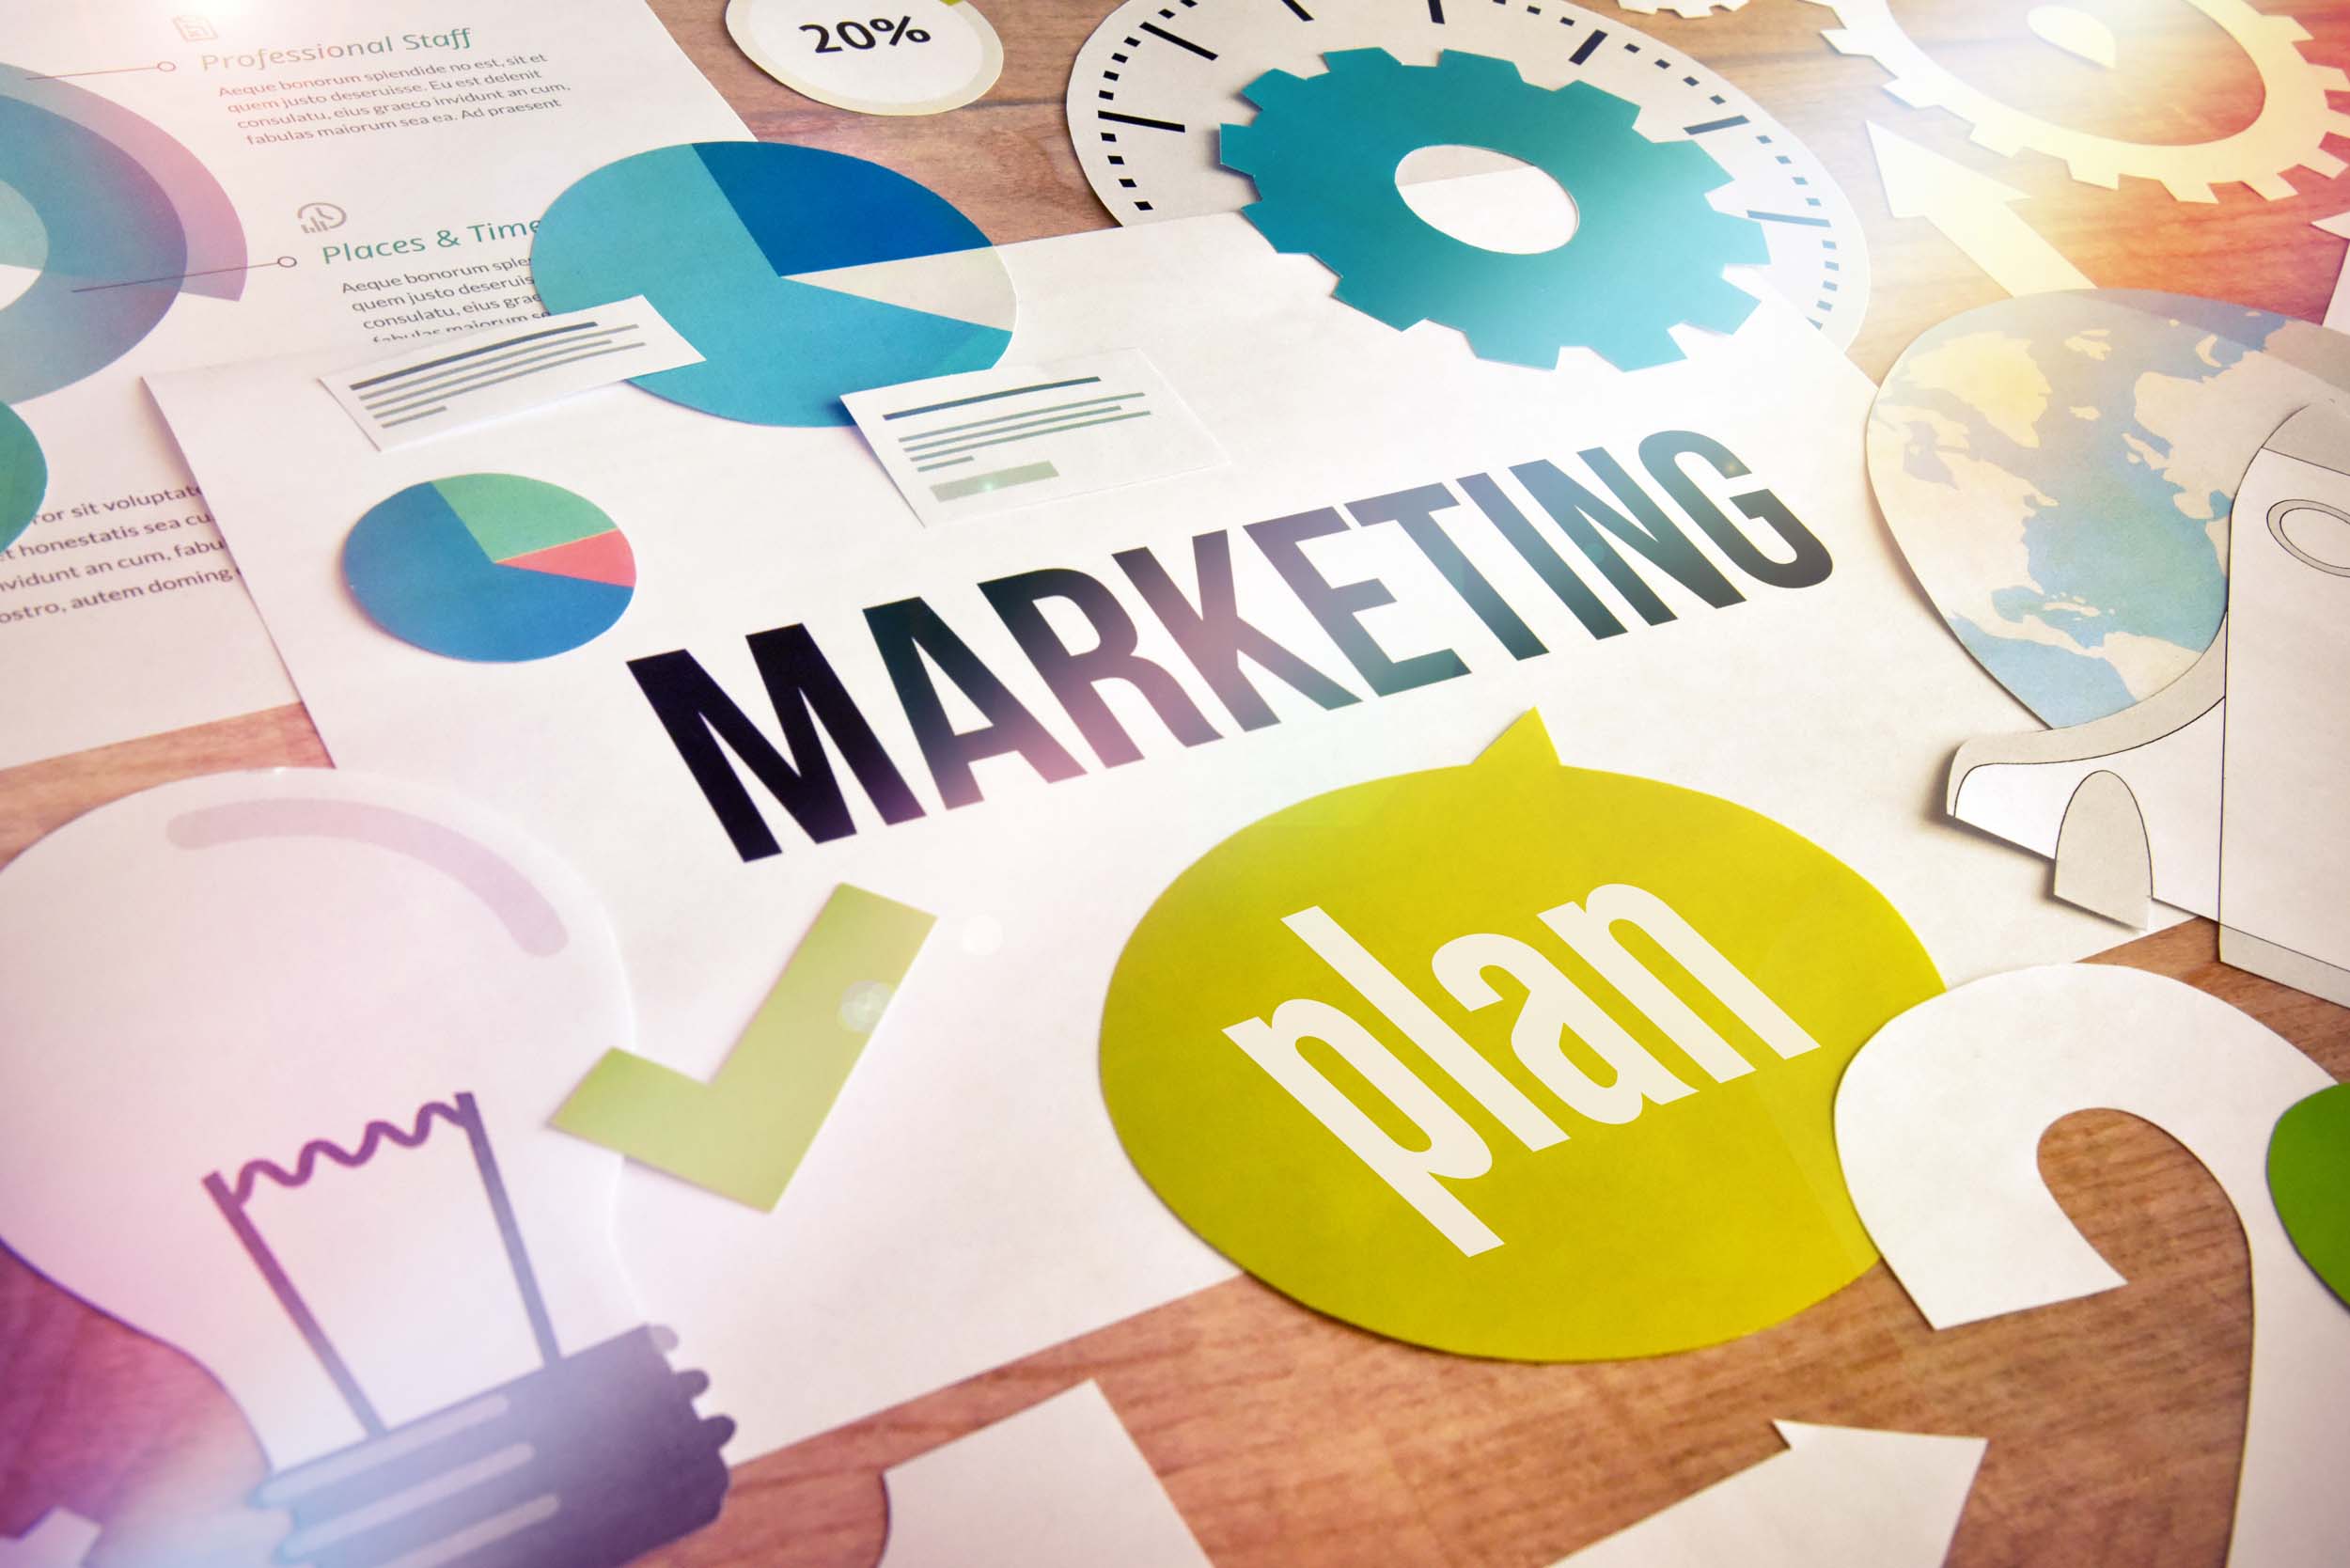 Marketing Consultancy: What Is It All About?